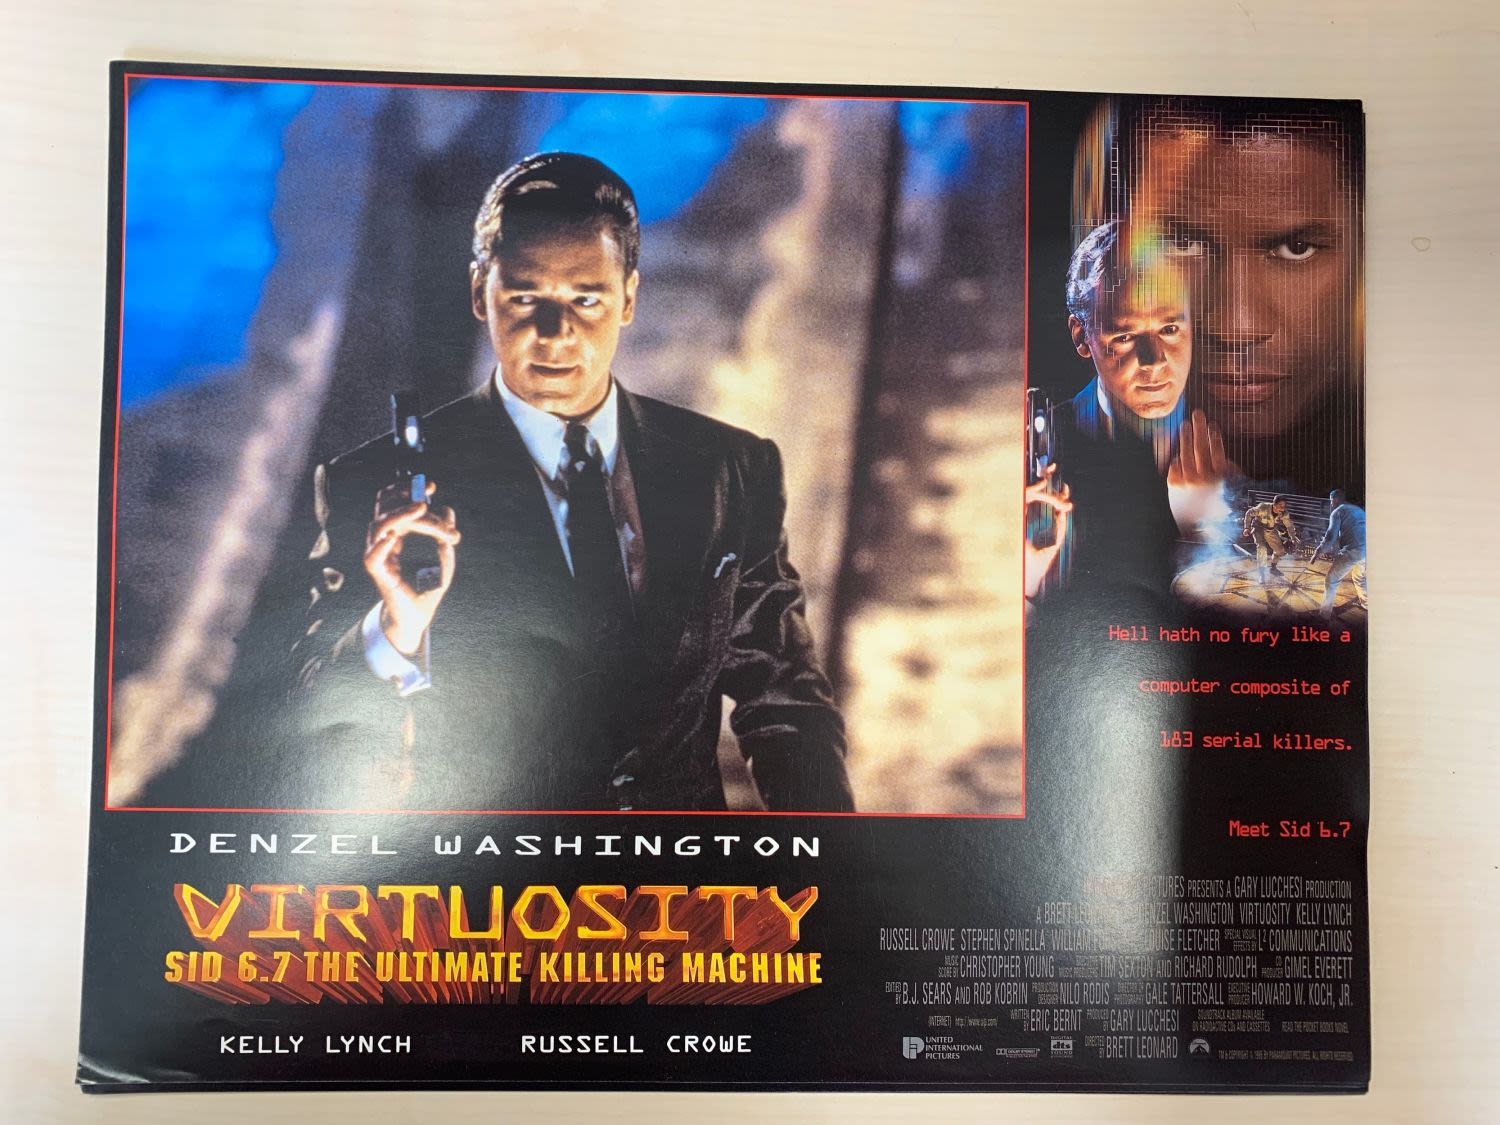 Large Movie Lobby Cards: Virtuosity The Big Red One 36x28 cm (L B2). - Image 4 of 4